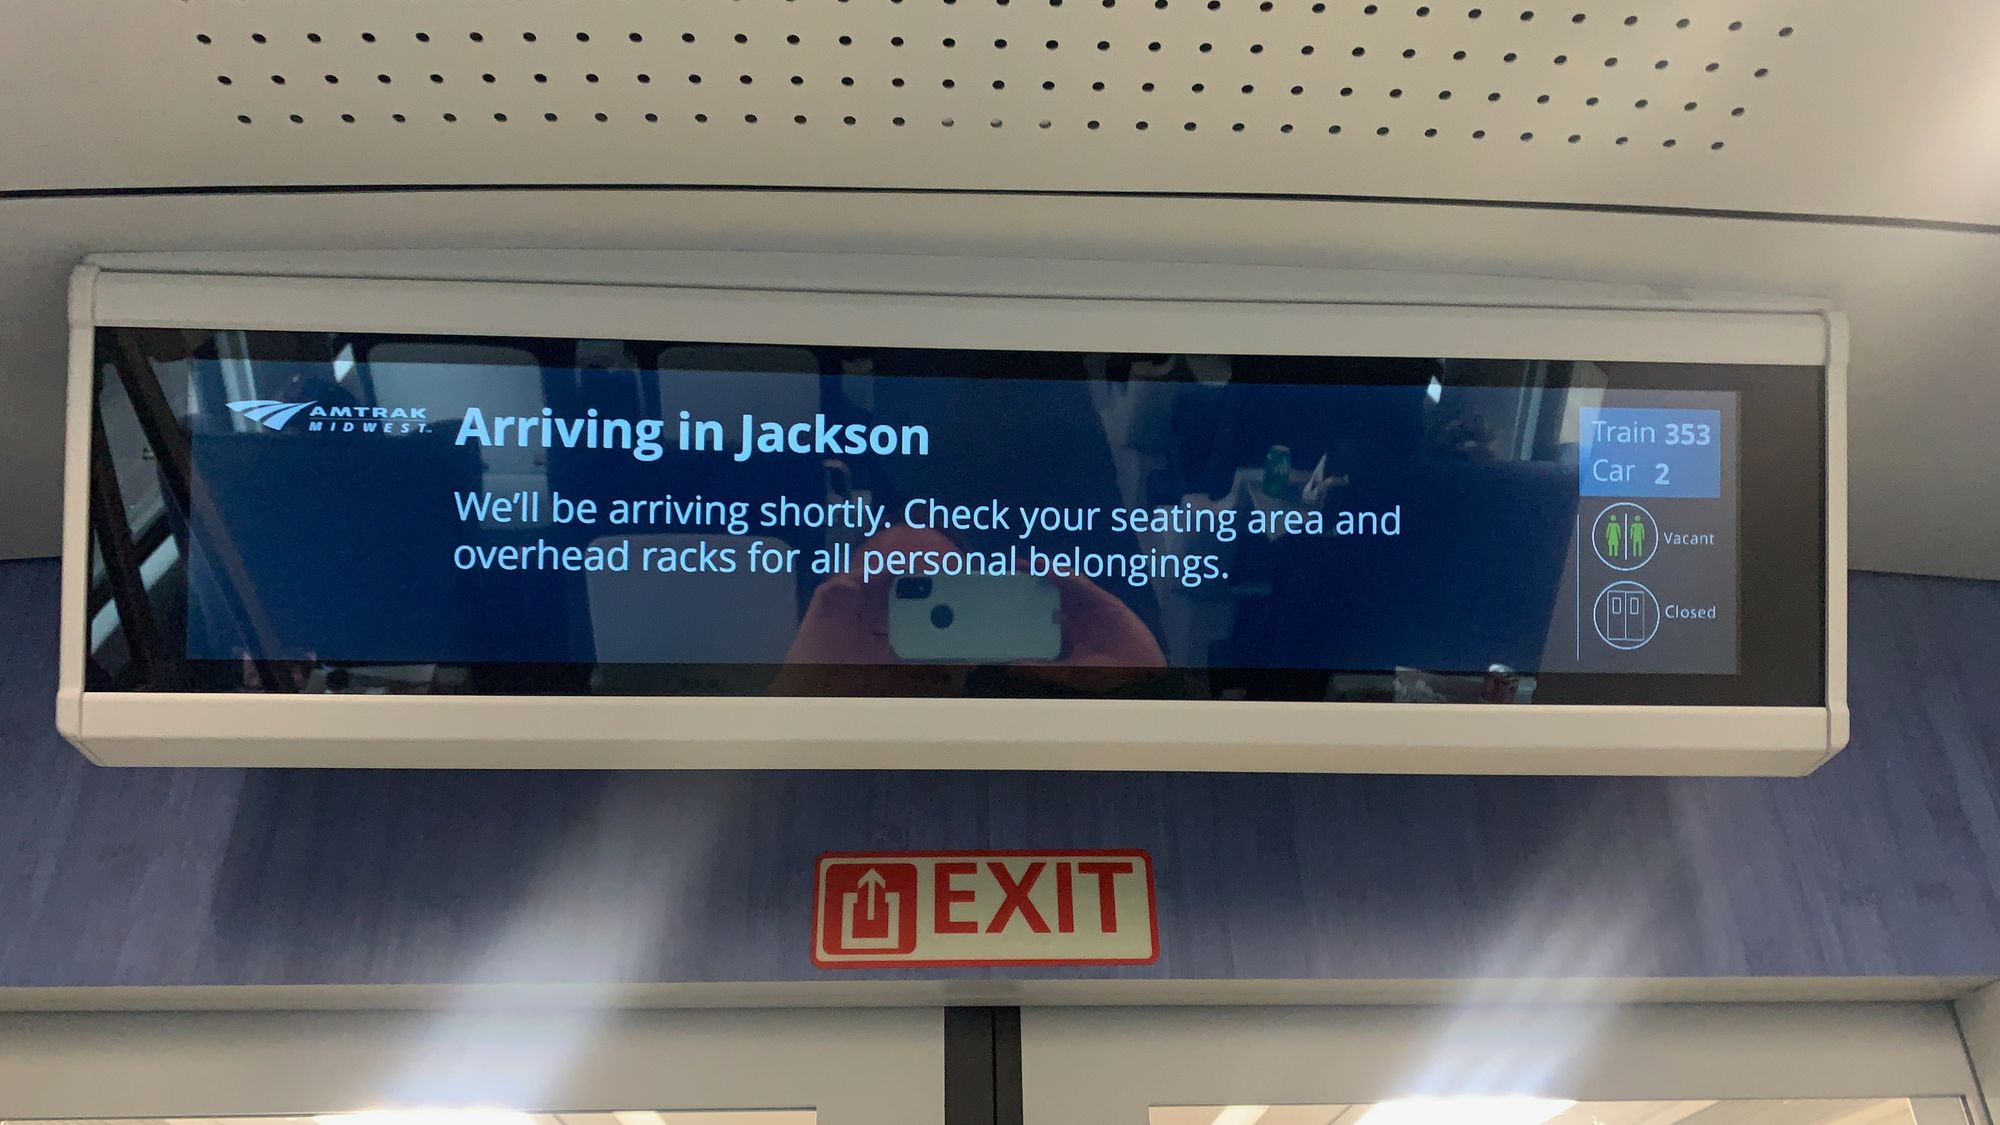 A digital display inside an Amtrak Wolverine coach class car. The screen reads: "Arriving in Jackson. We'll be arriving shortly. Check your seating area and overhead racks for all personal belongings." A sidebar diplay shows the train number, 353, the car number, 2, and shows that the restroom is vacant.